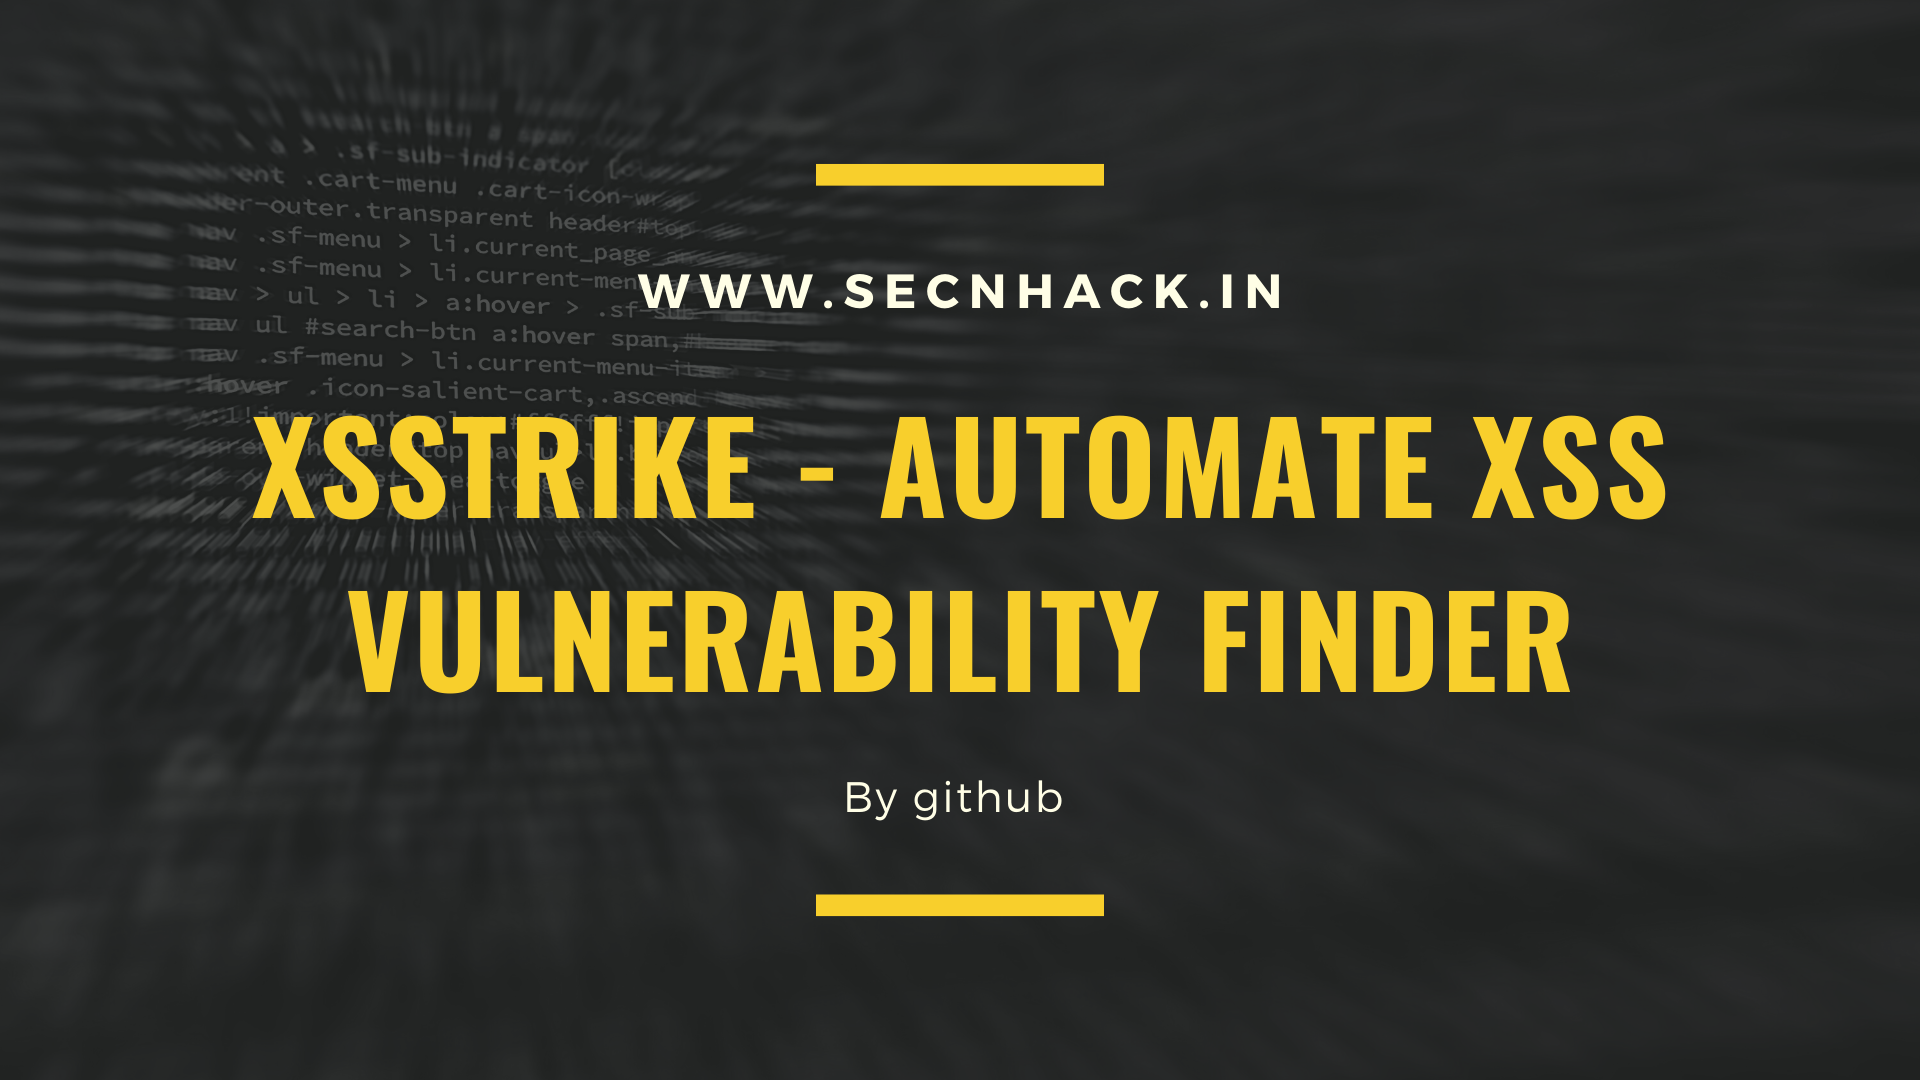 Install and use of XSStrike to find XSS vulnerabilities 